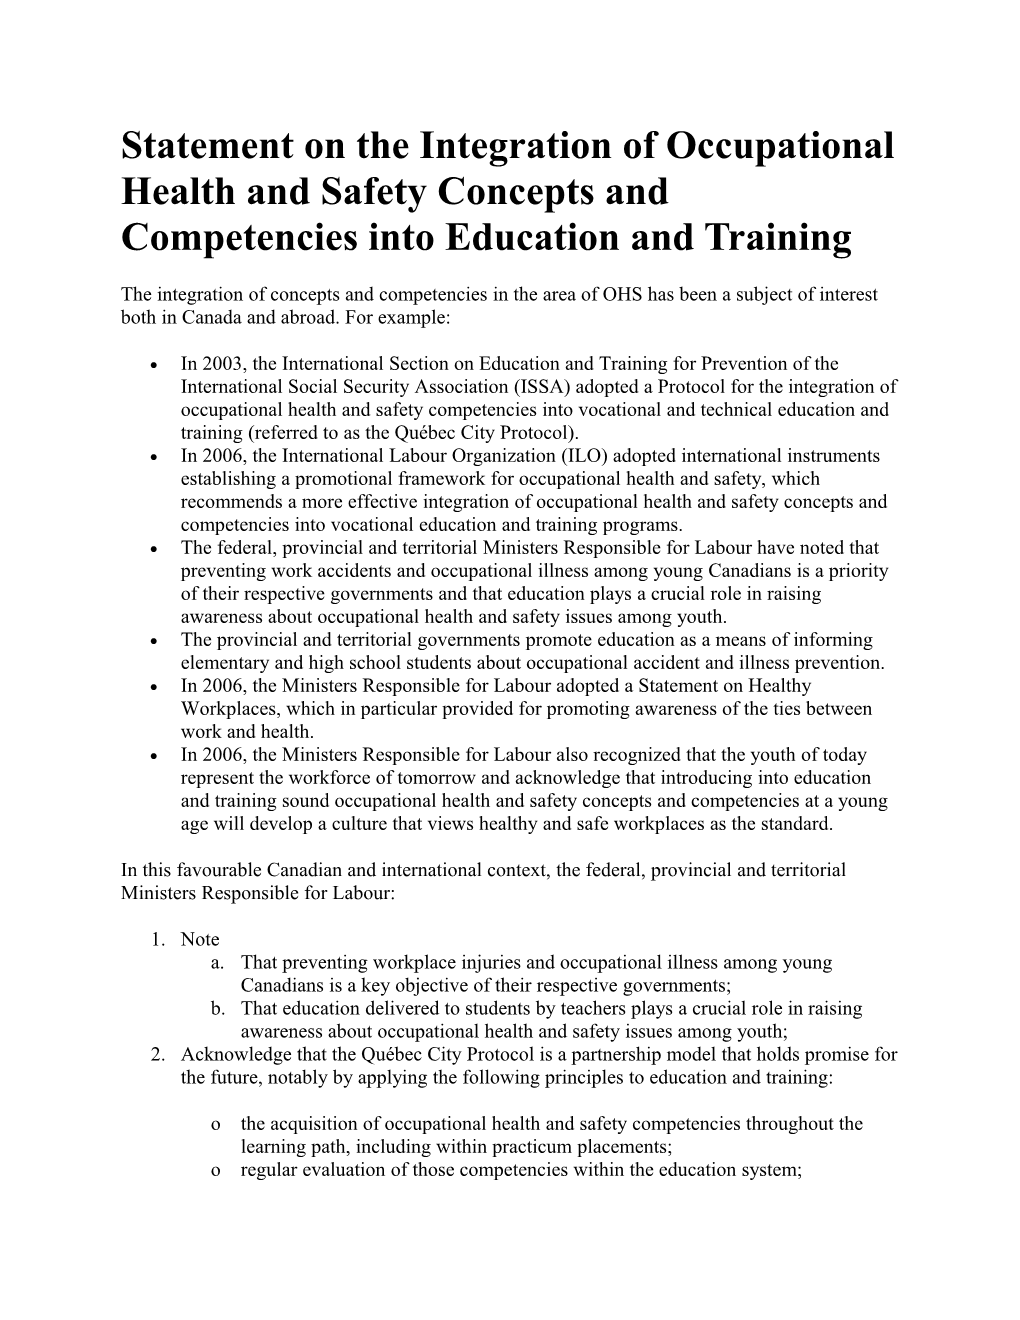 Statement on the Integration of Occupational Health and Safety Concepts and Competencies